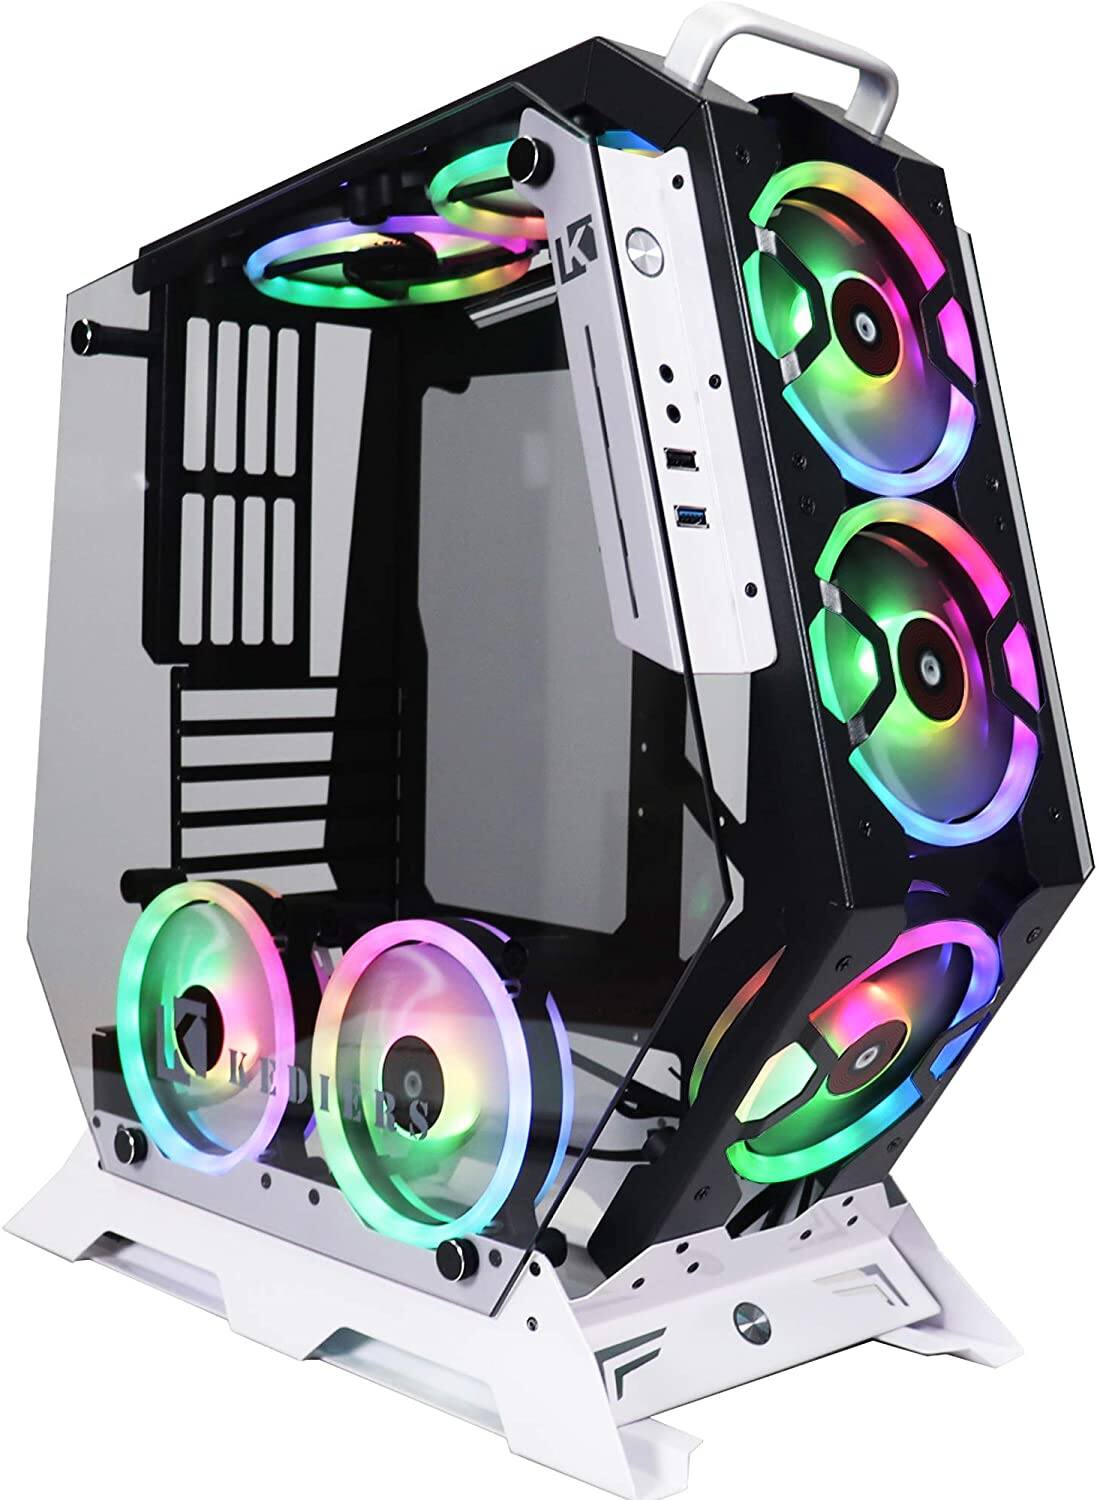  KEDIERS PC Case - ATX Tower Tempered Glass Gaming